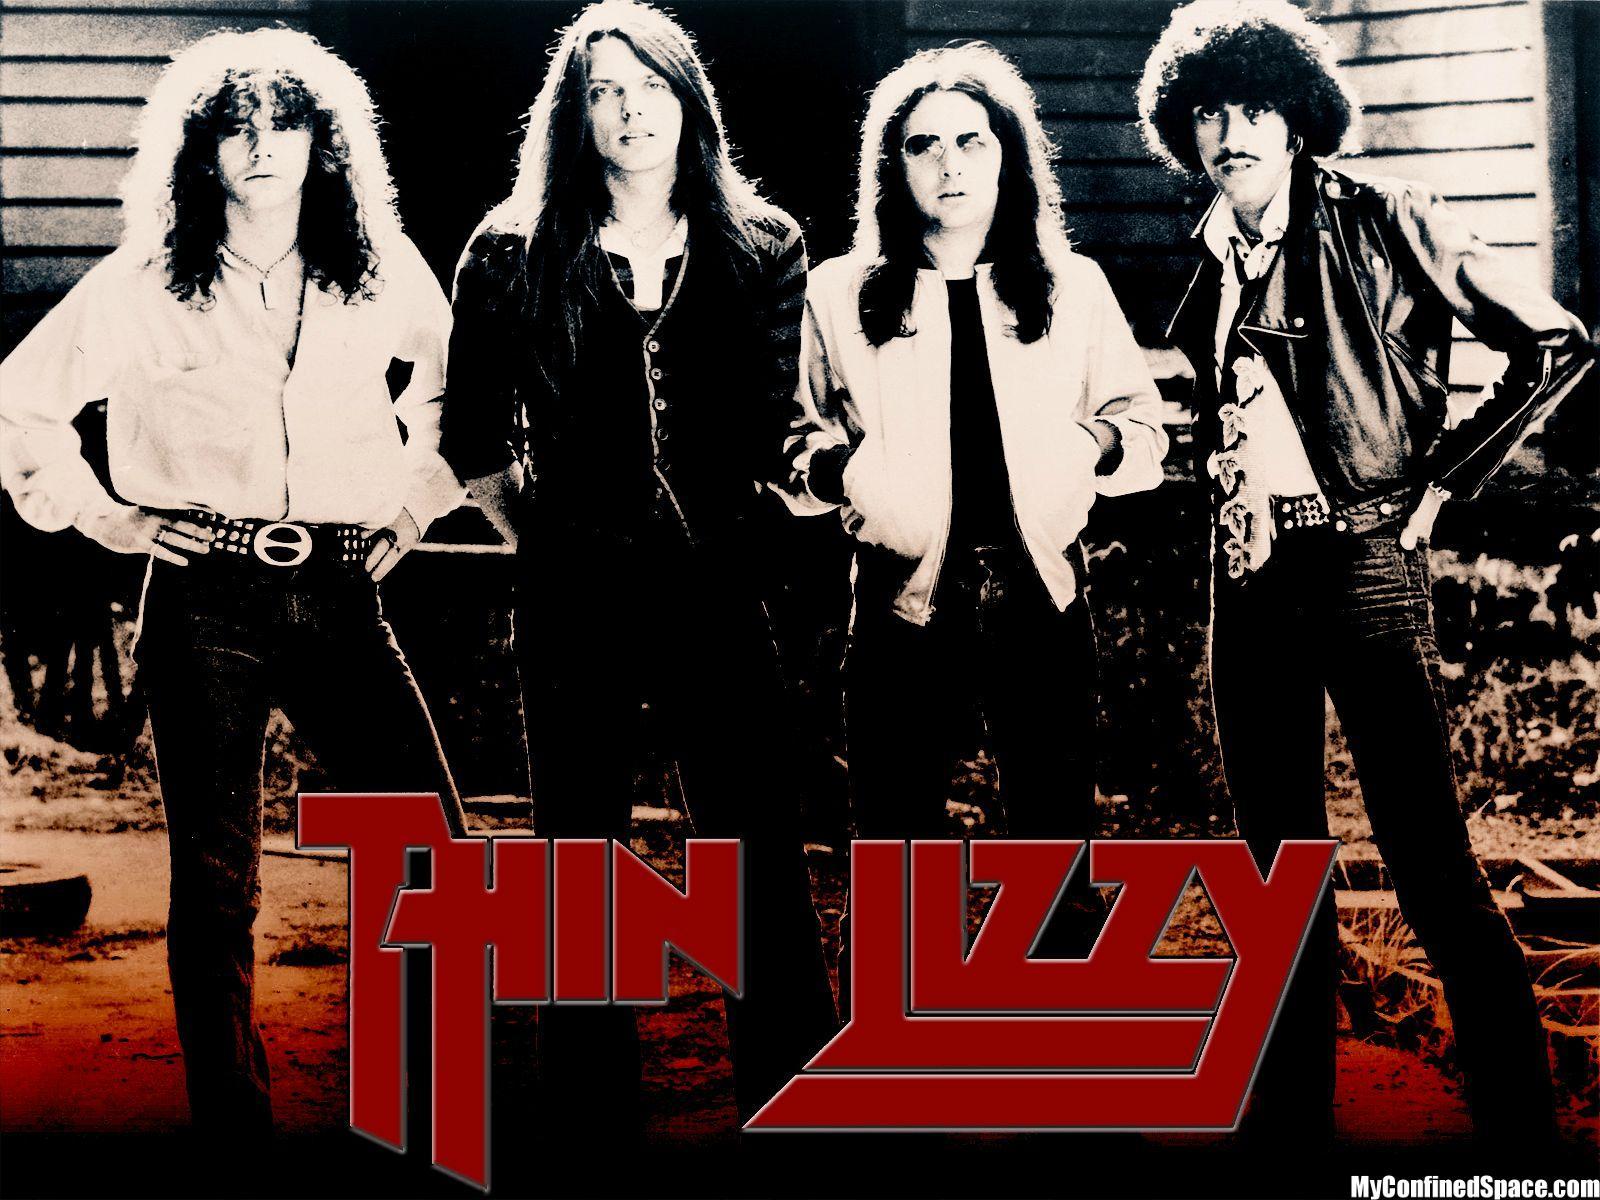 Bad Reputation! Thin Lizzy!. The Great Classic Rock Band THIN